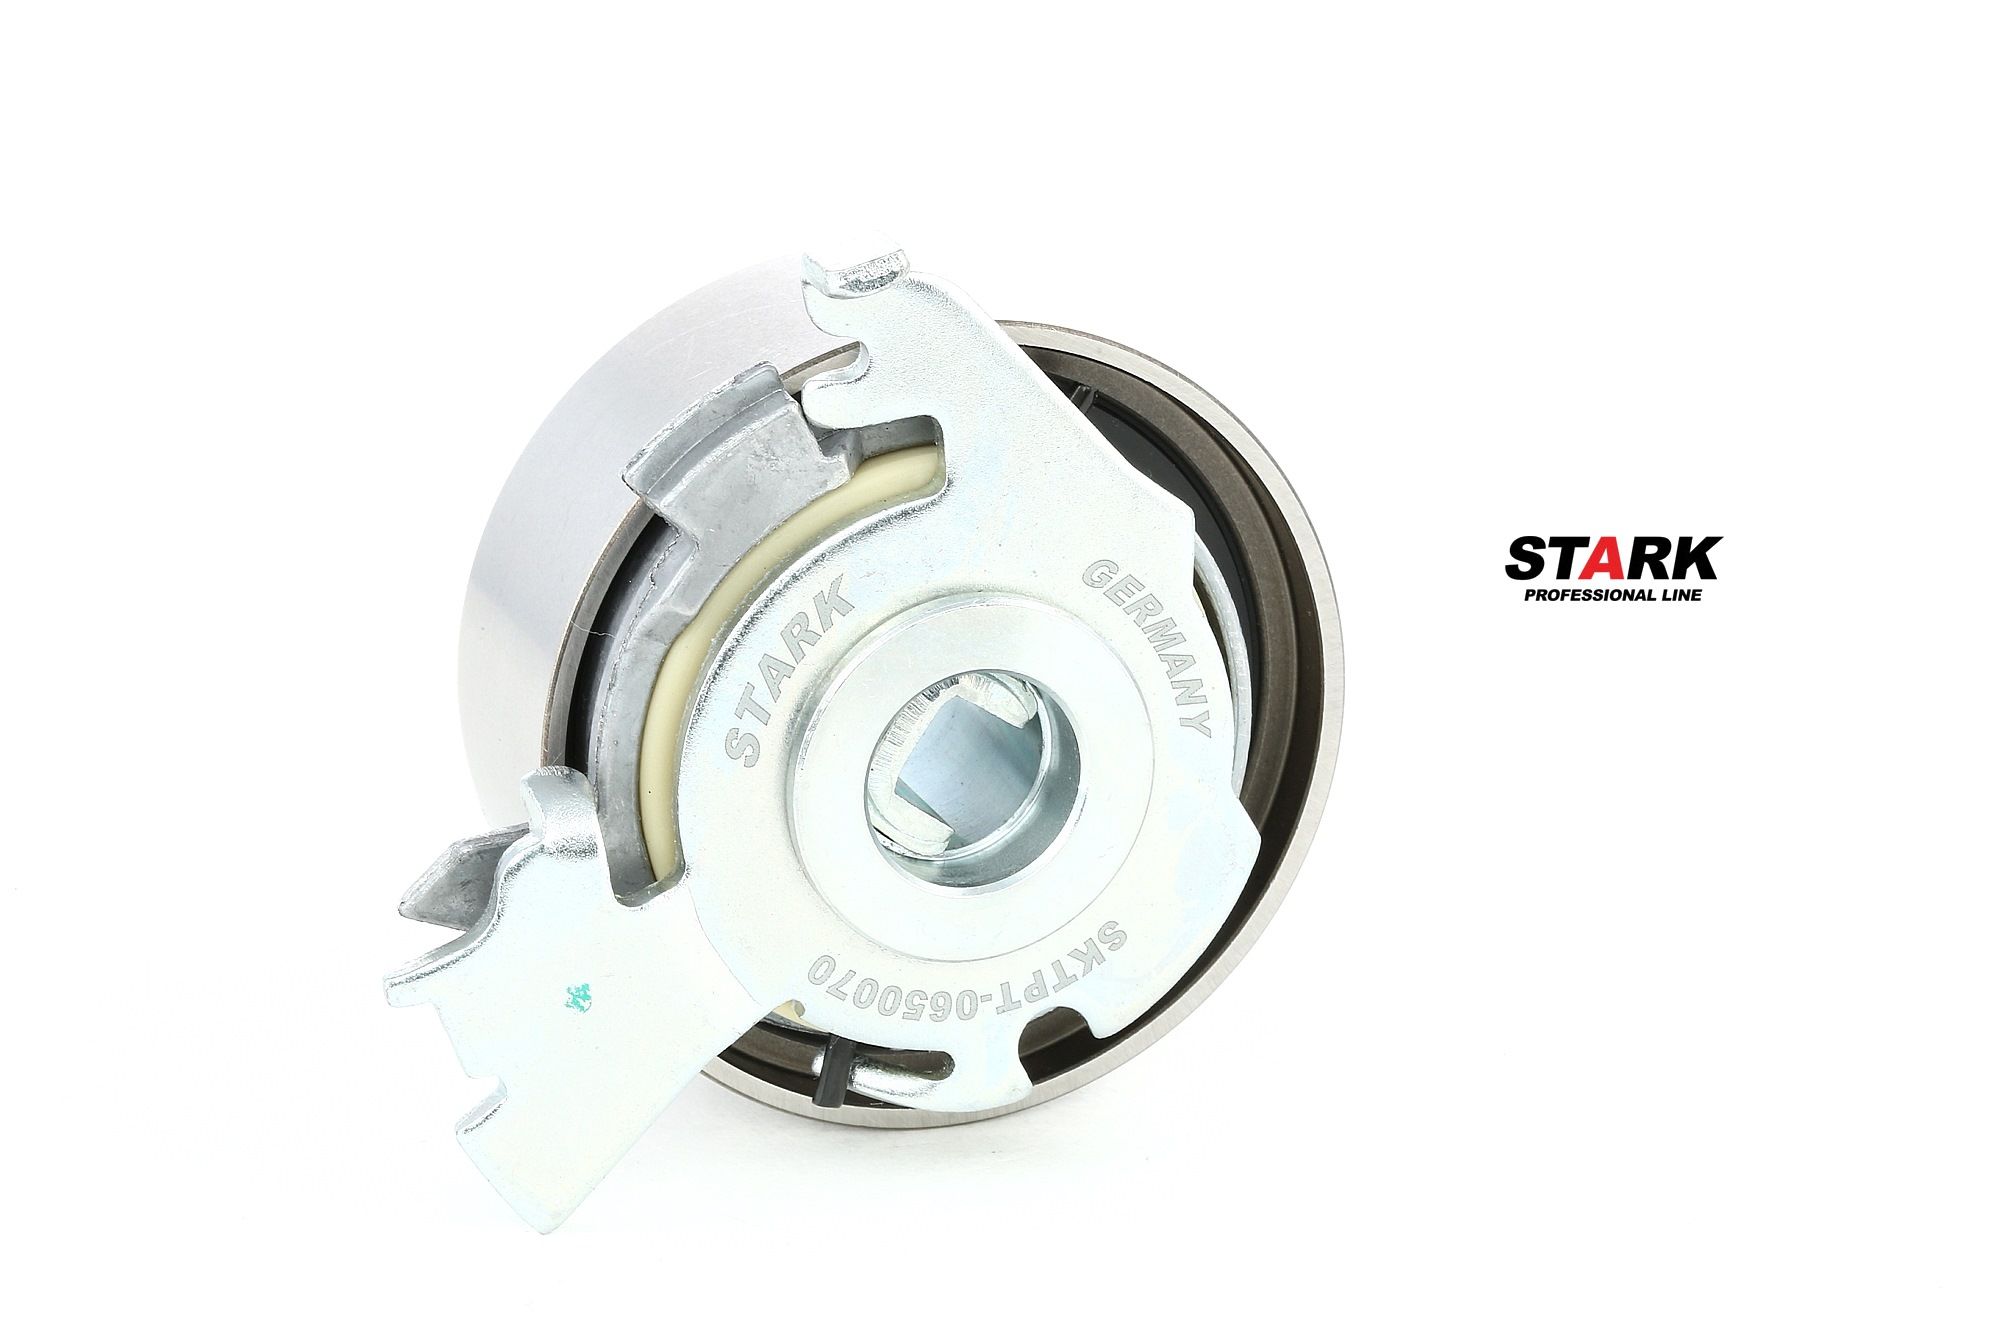 Original SKTPT-0650070 STARK Timing belt tensioner pulley experience and price